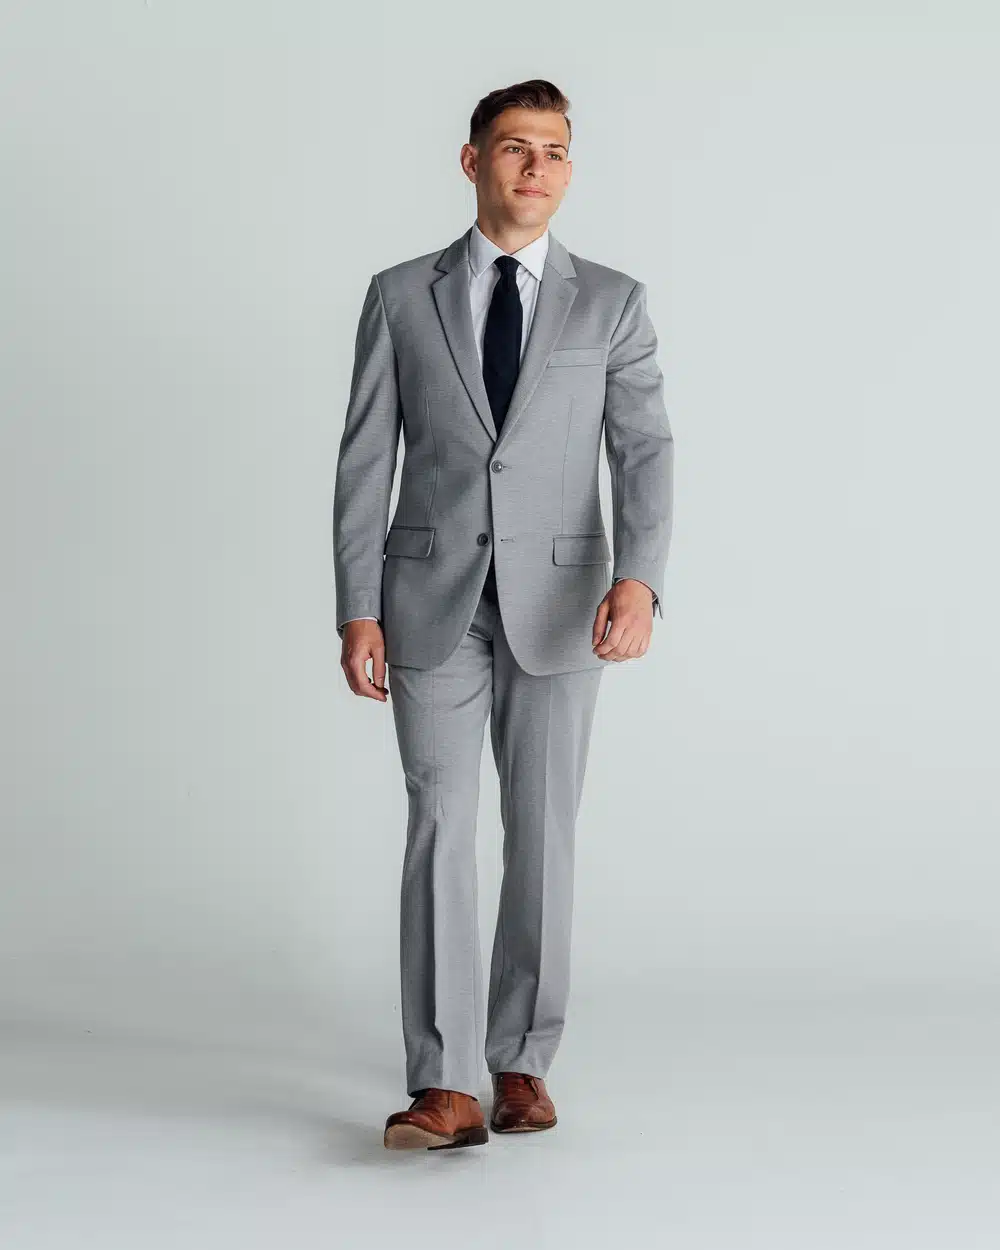 Missionary Mall Robbins and Brooks Suit